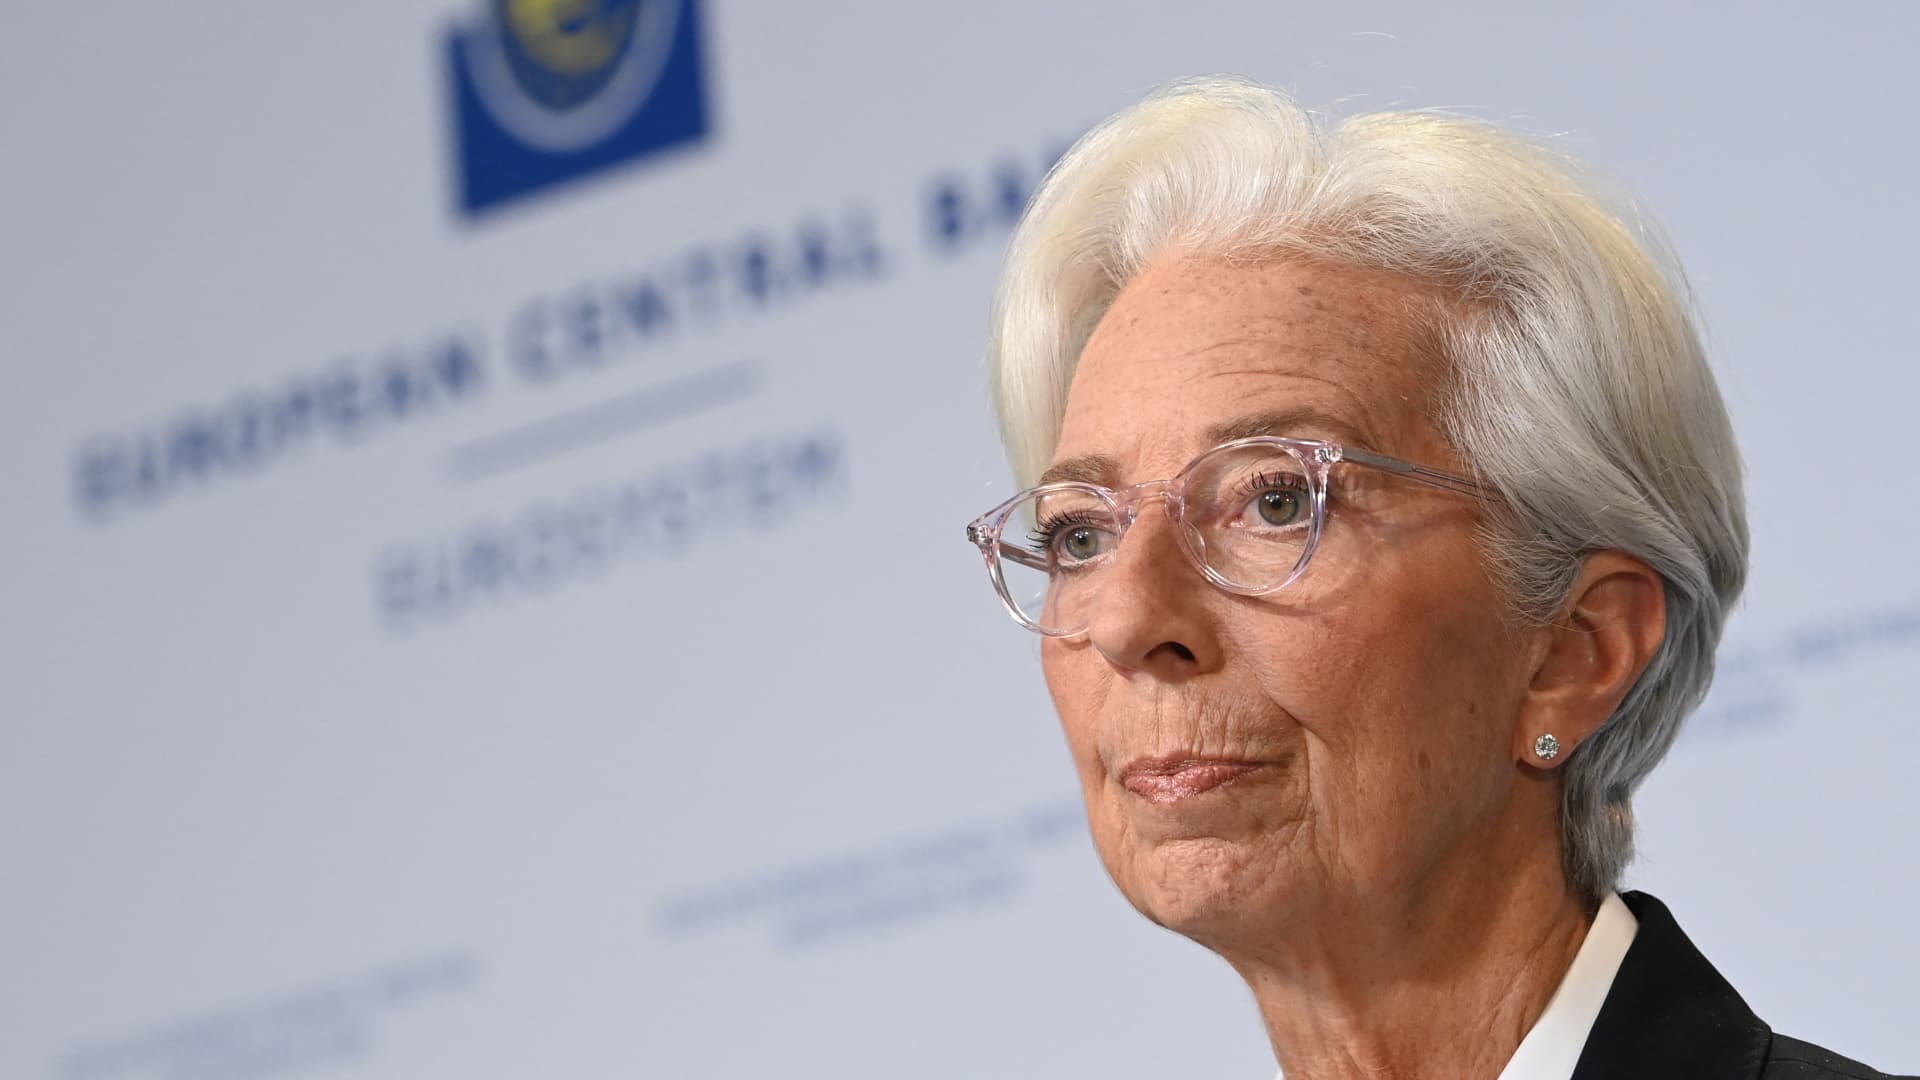 Christine Lagarde, President of the European Central Bank. The central bank scheduled an emergency meeting to address higher bond yields.